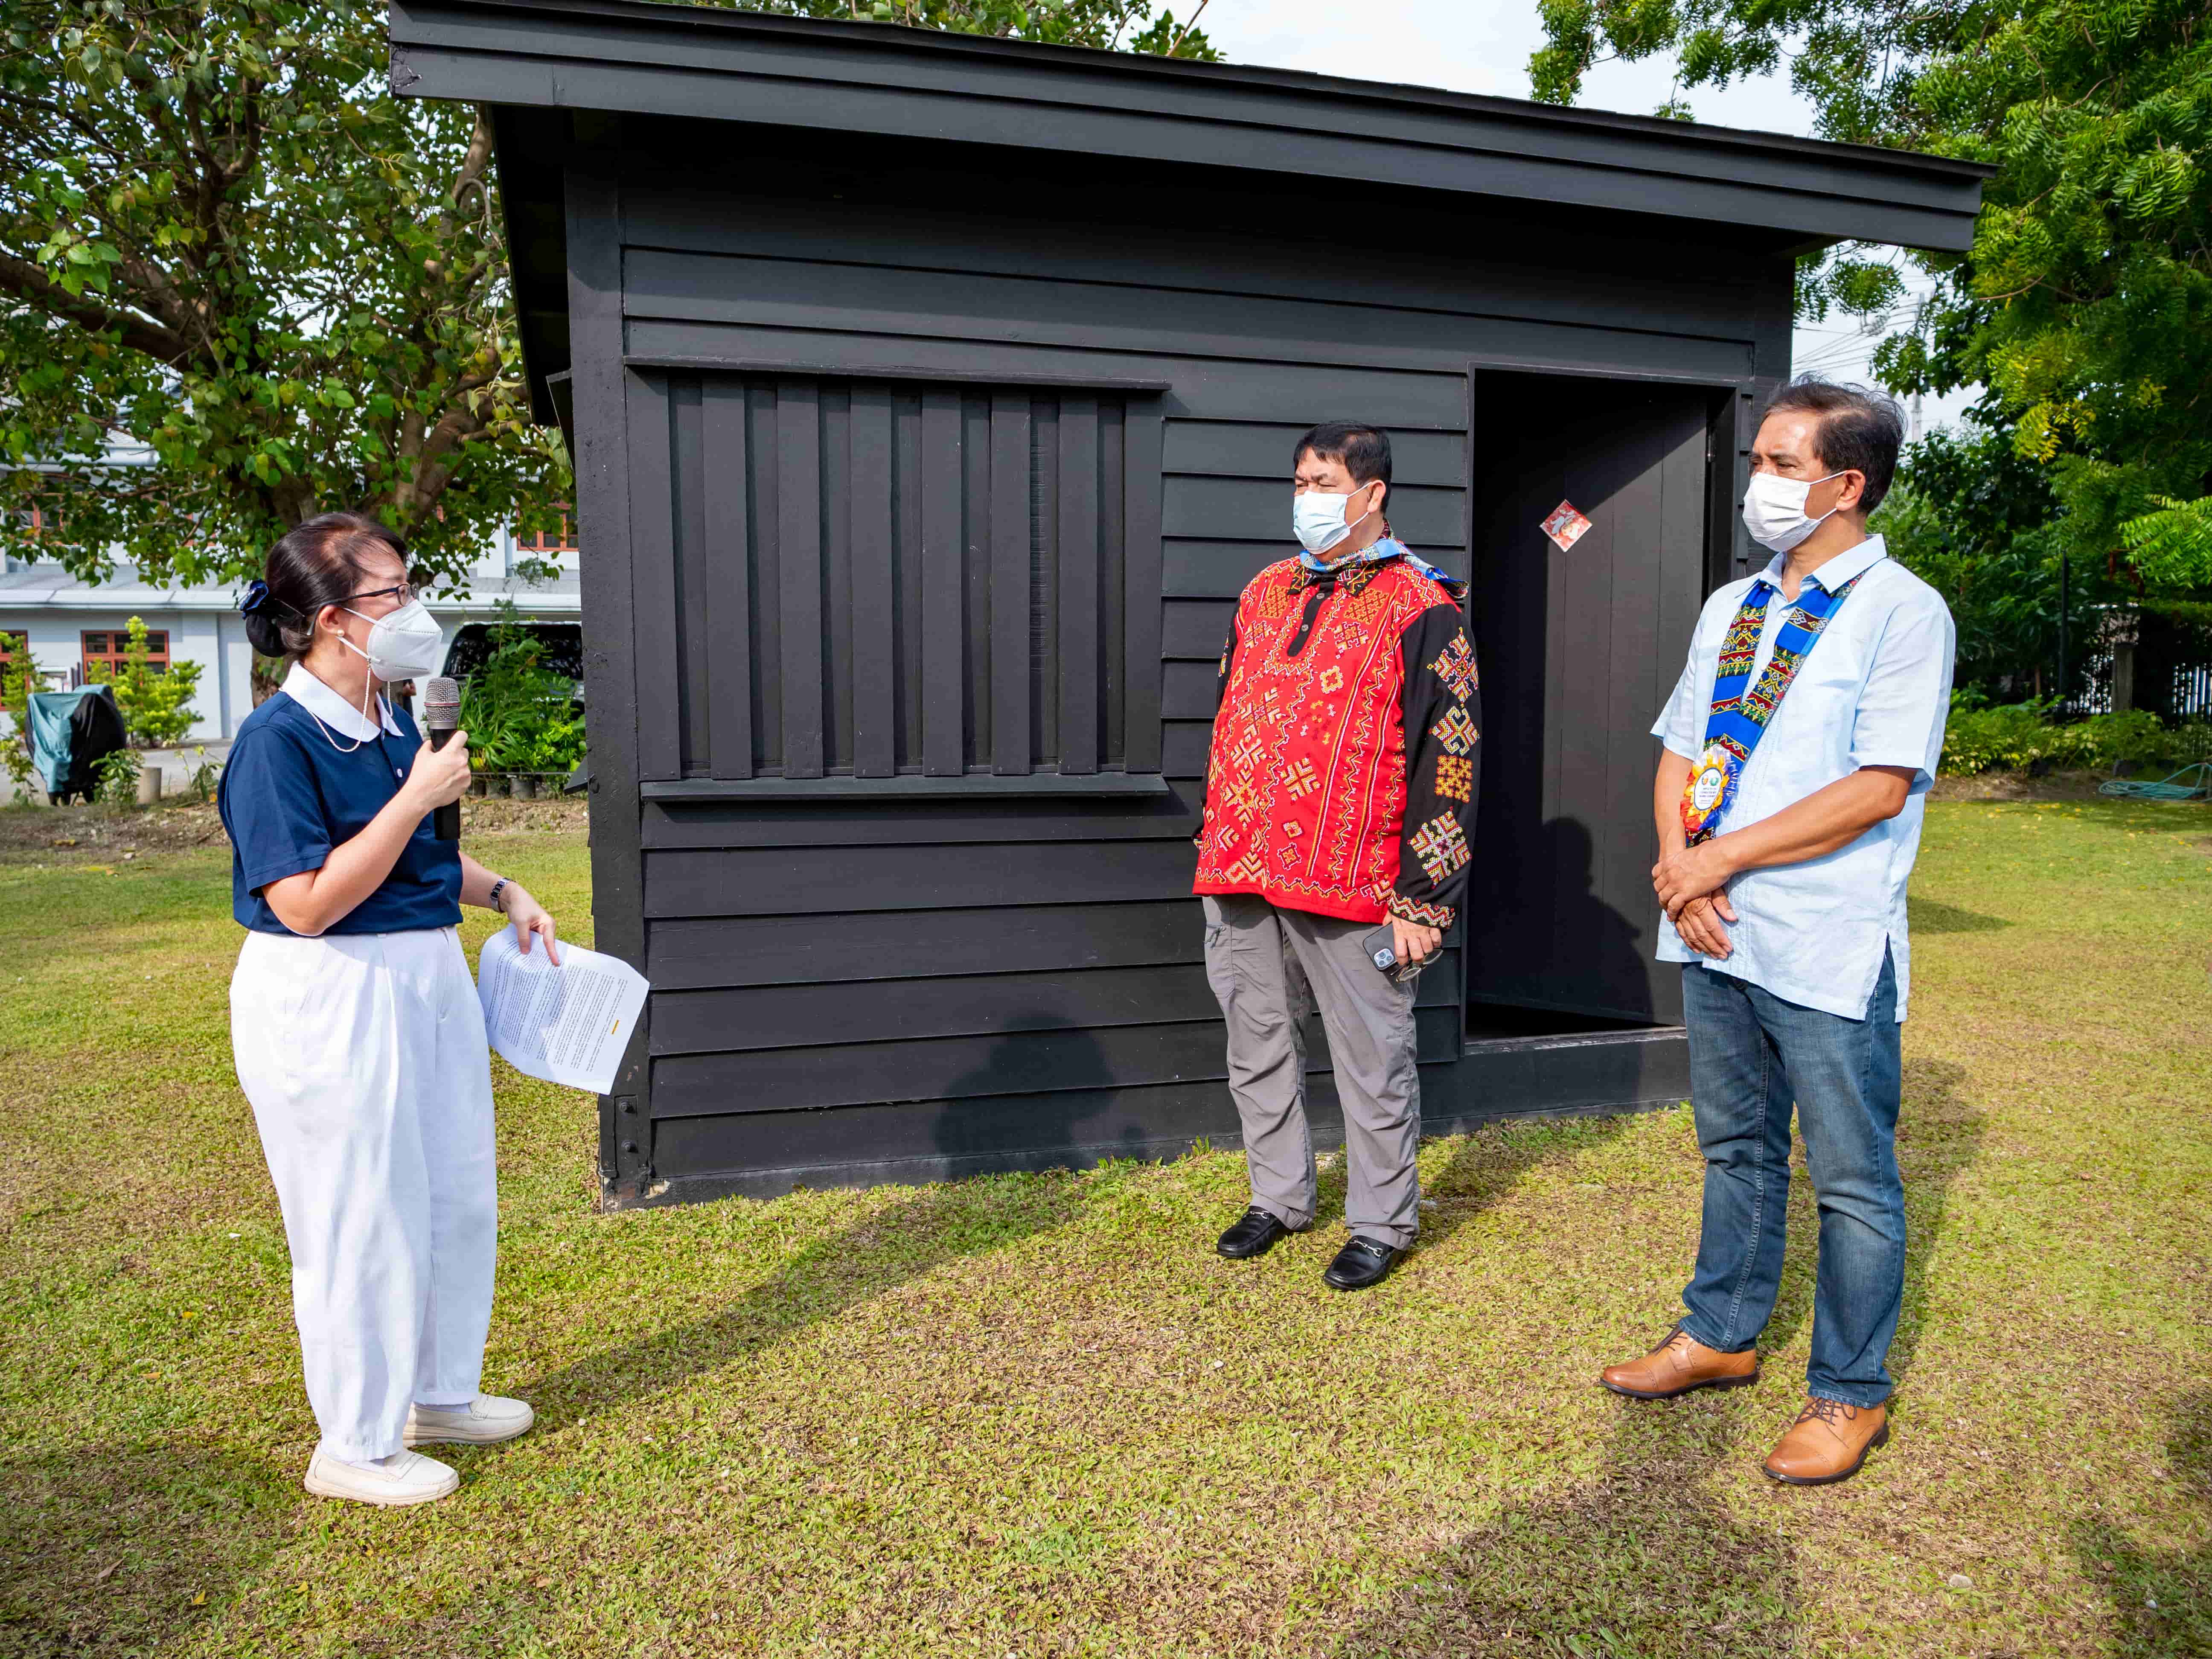 Tzu Chi volunteers talking about the history of the wooden hut during the campus tour.【Photo by Daniel Lazar】